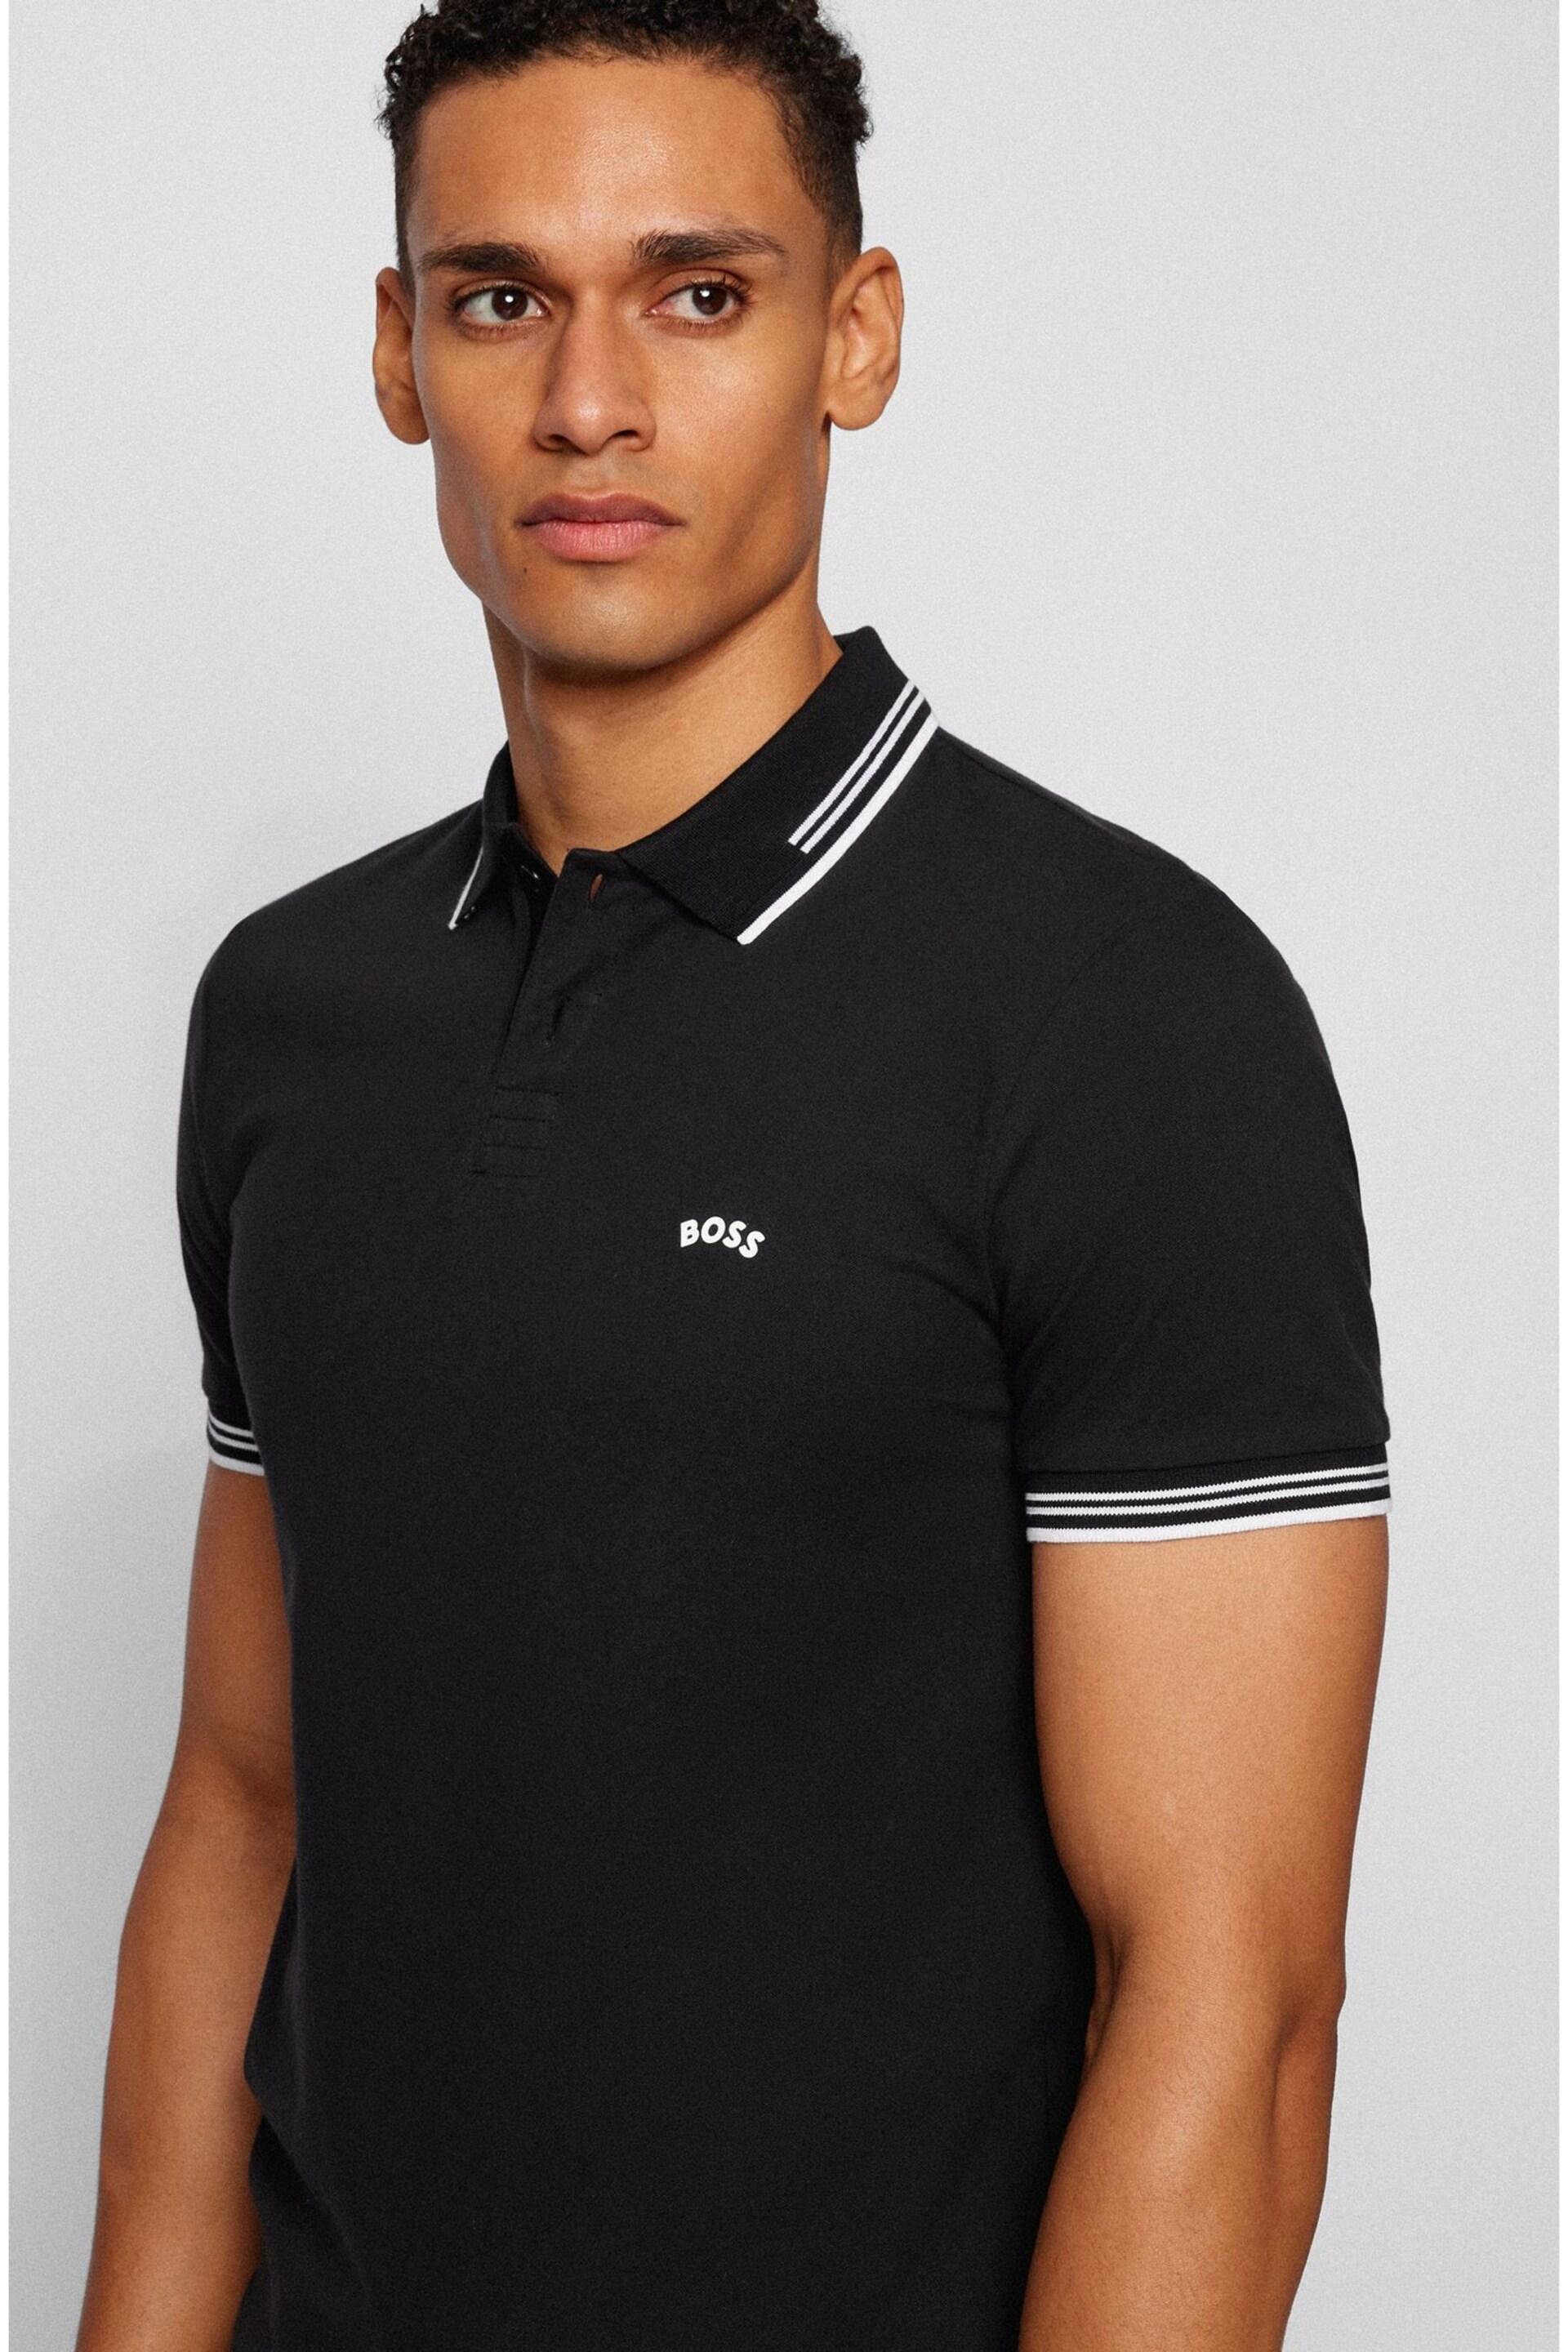 BOSS Black Tipped Slim Fit Stretch Cotton Polo Shirt - Image 4 of 5